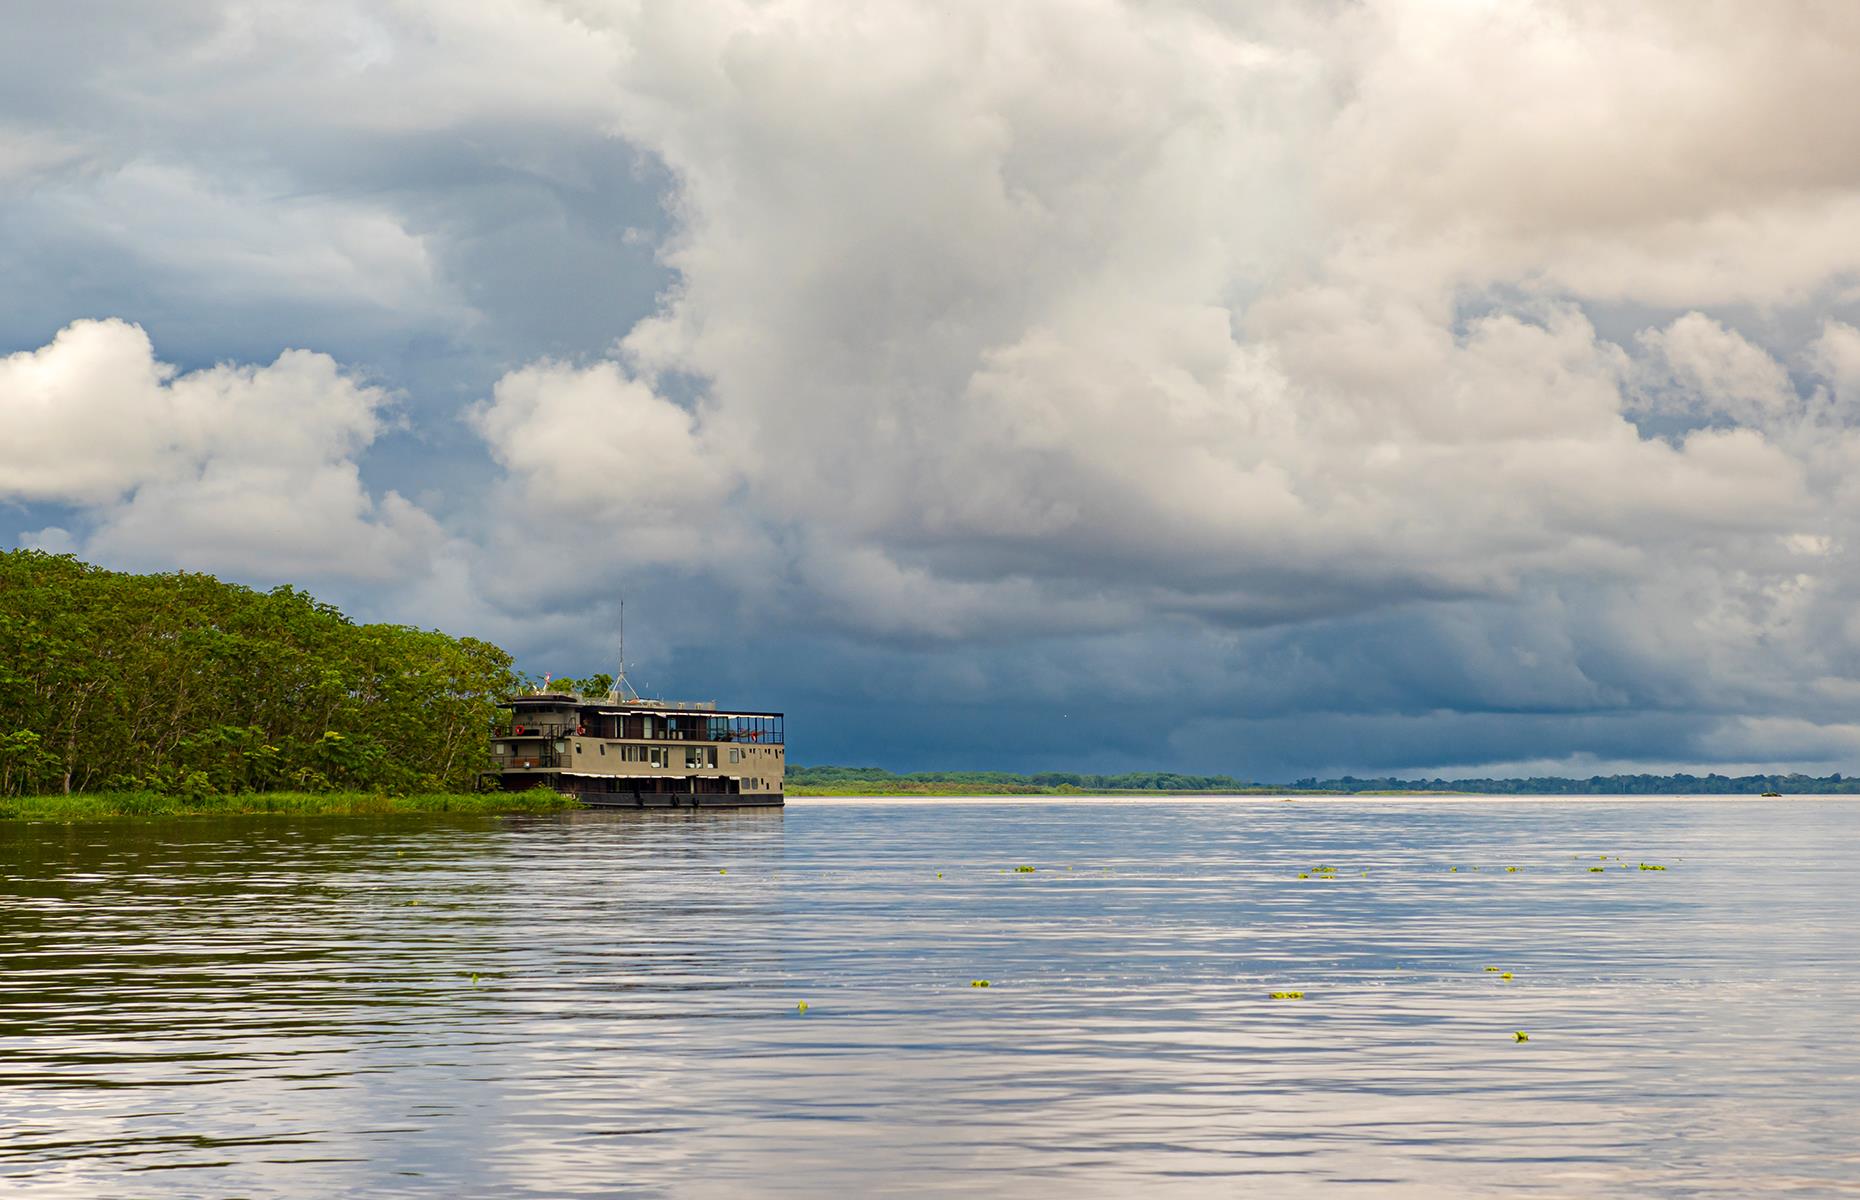 <p>More river cruise lines are heading to remote rivers. One example is <a href="https://www.seabourn.com/en_US.html">Seabourn</a>. In 2023 the line will launch a 14-day Wild Guianas To The Amazon Basin cruise, which sails along Brazil’s Guajará River, a tributary of the Amazon. Excursions include a trip to meet local indigenous groups – a reminder that Amazon river cruises are great options for getting off the beaten path.</p>